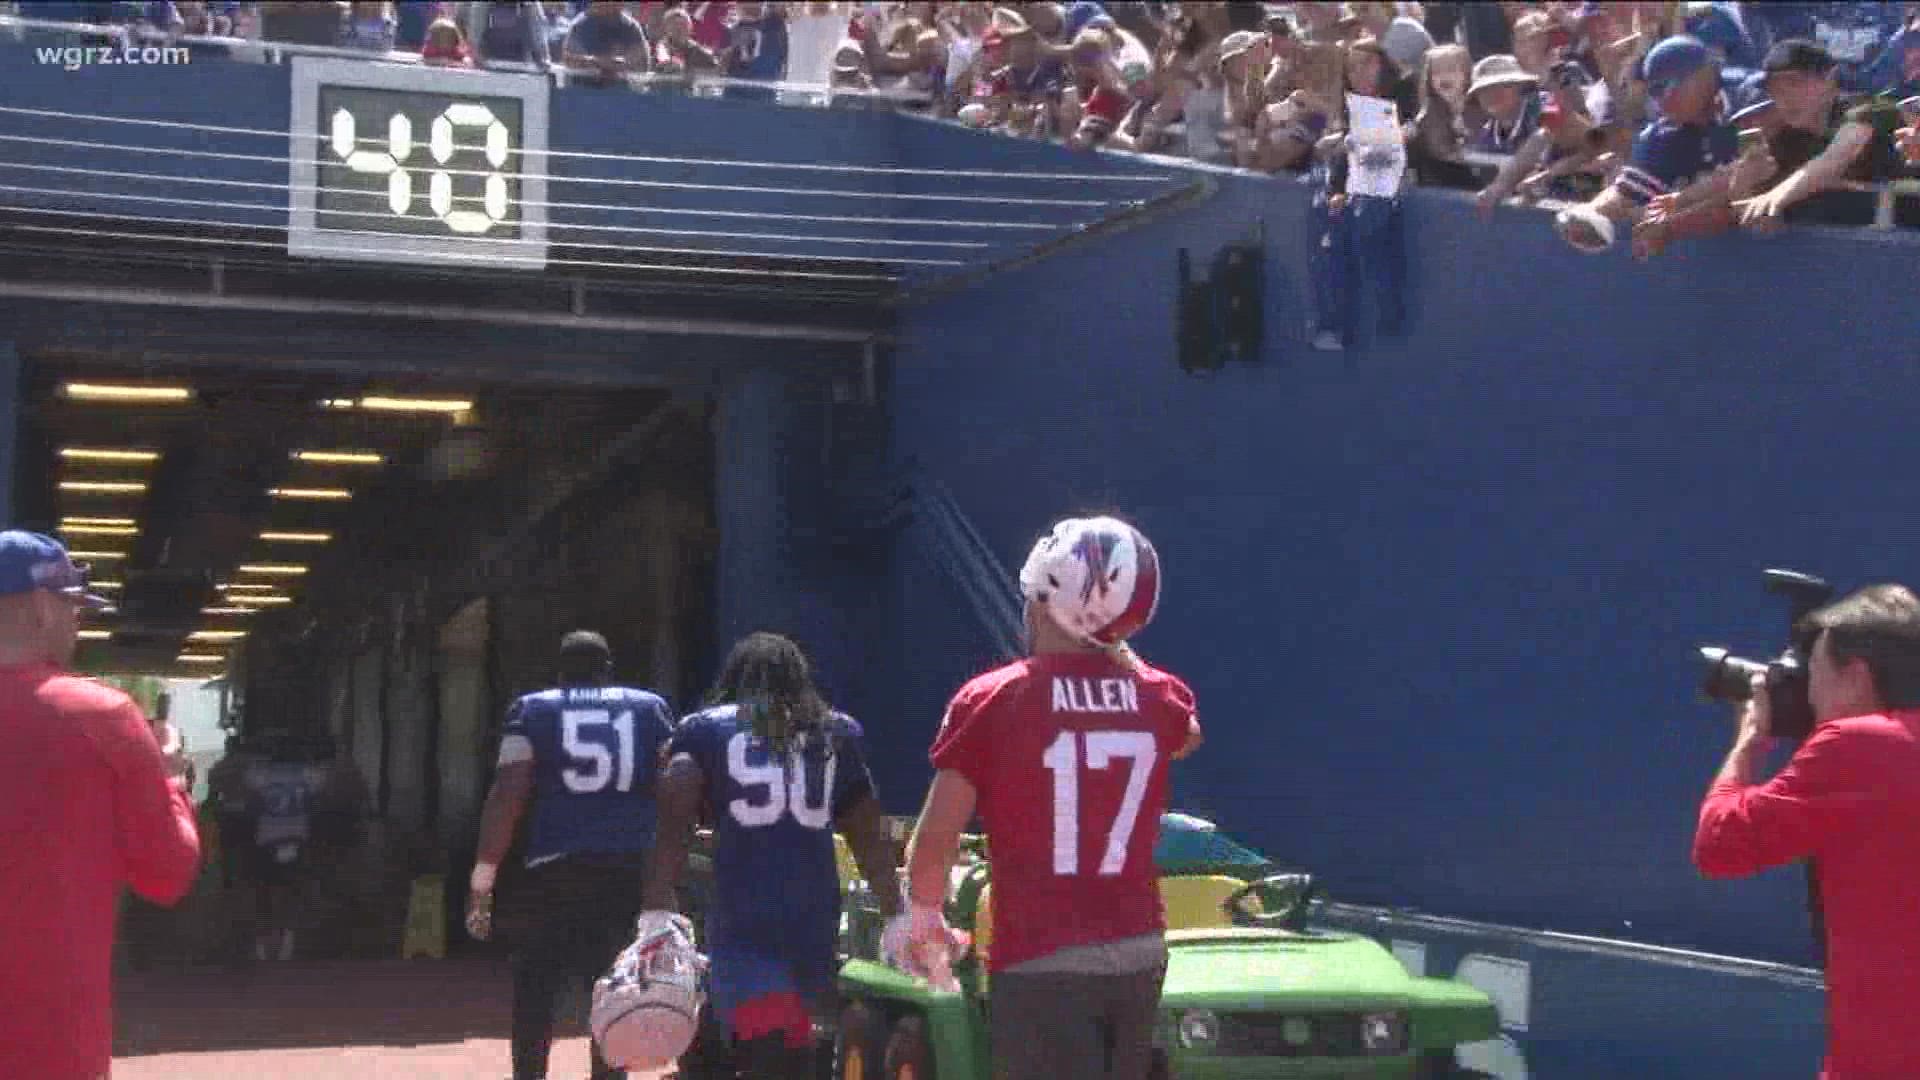 Bills fans excited for upcoming season